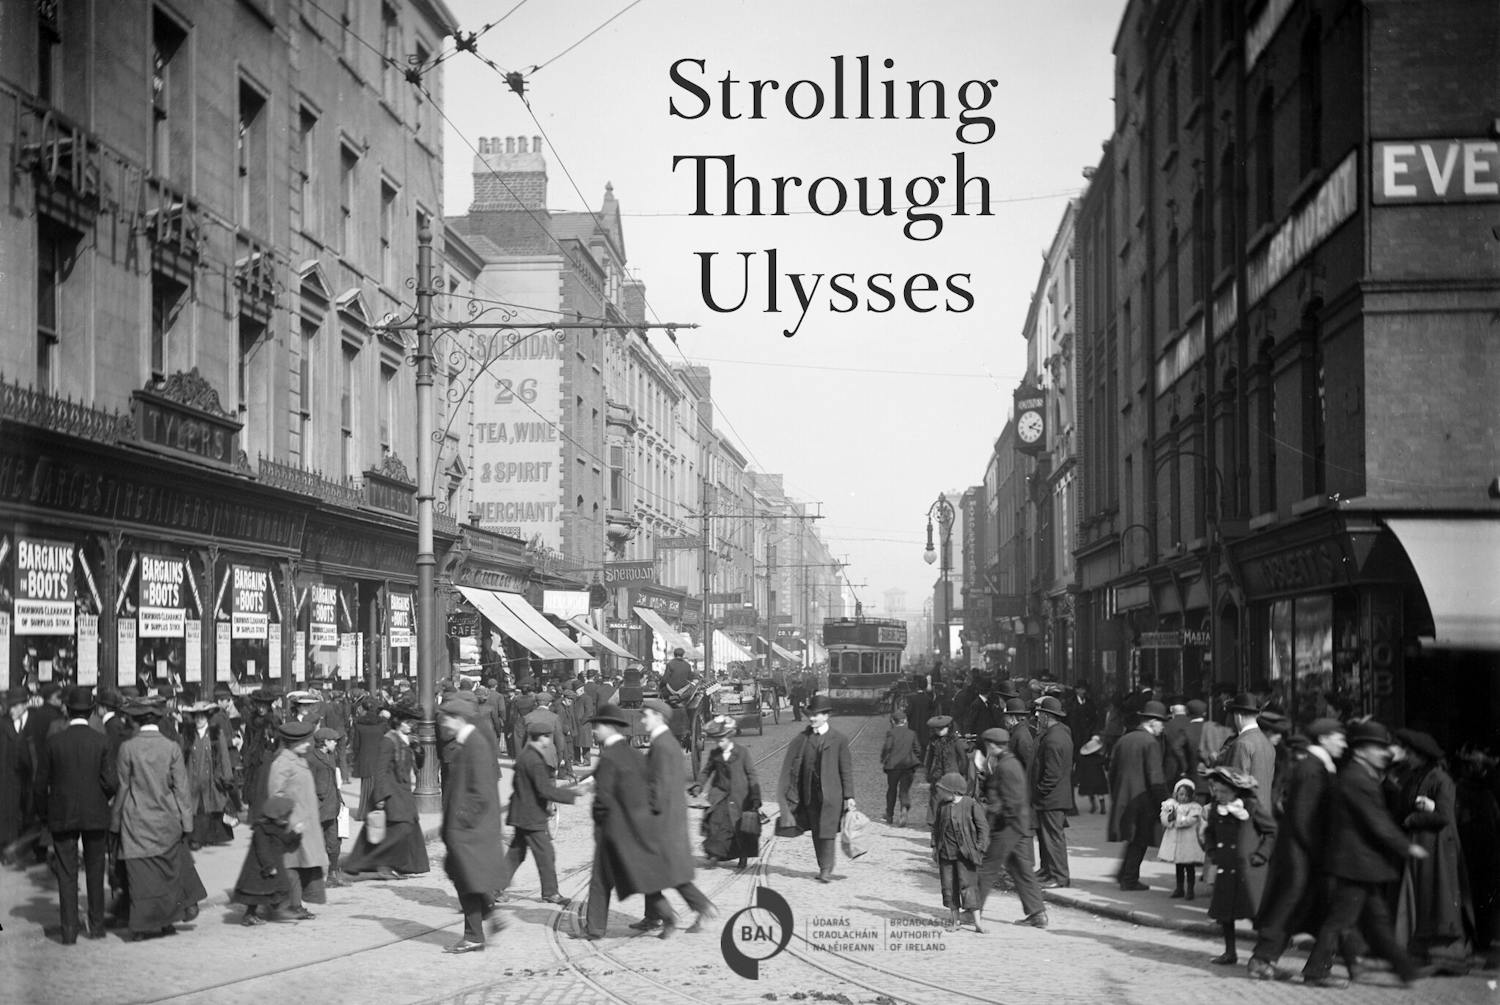 Strolling Through Ulysses - Episode One